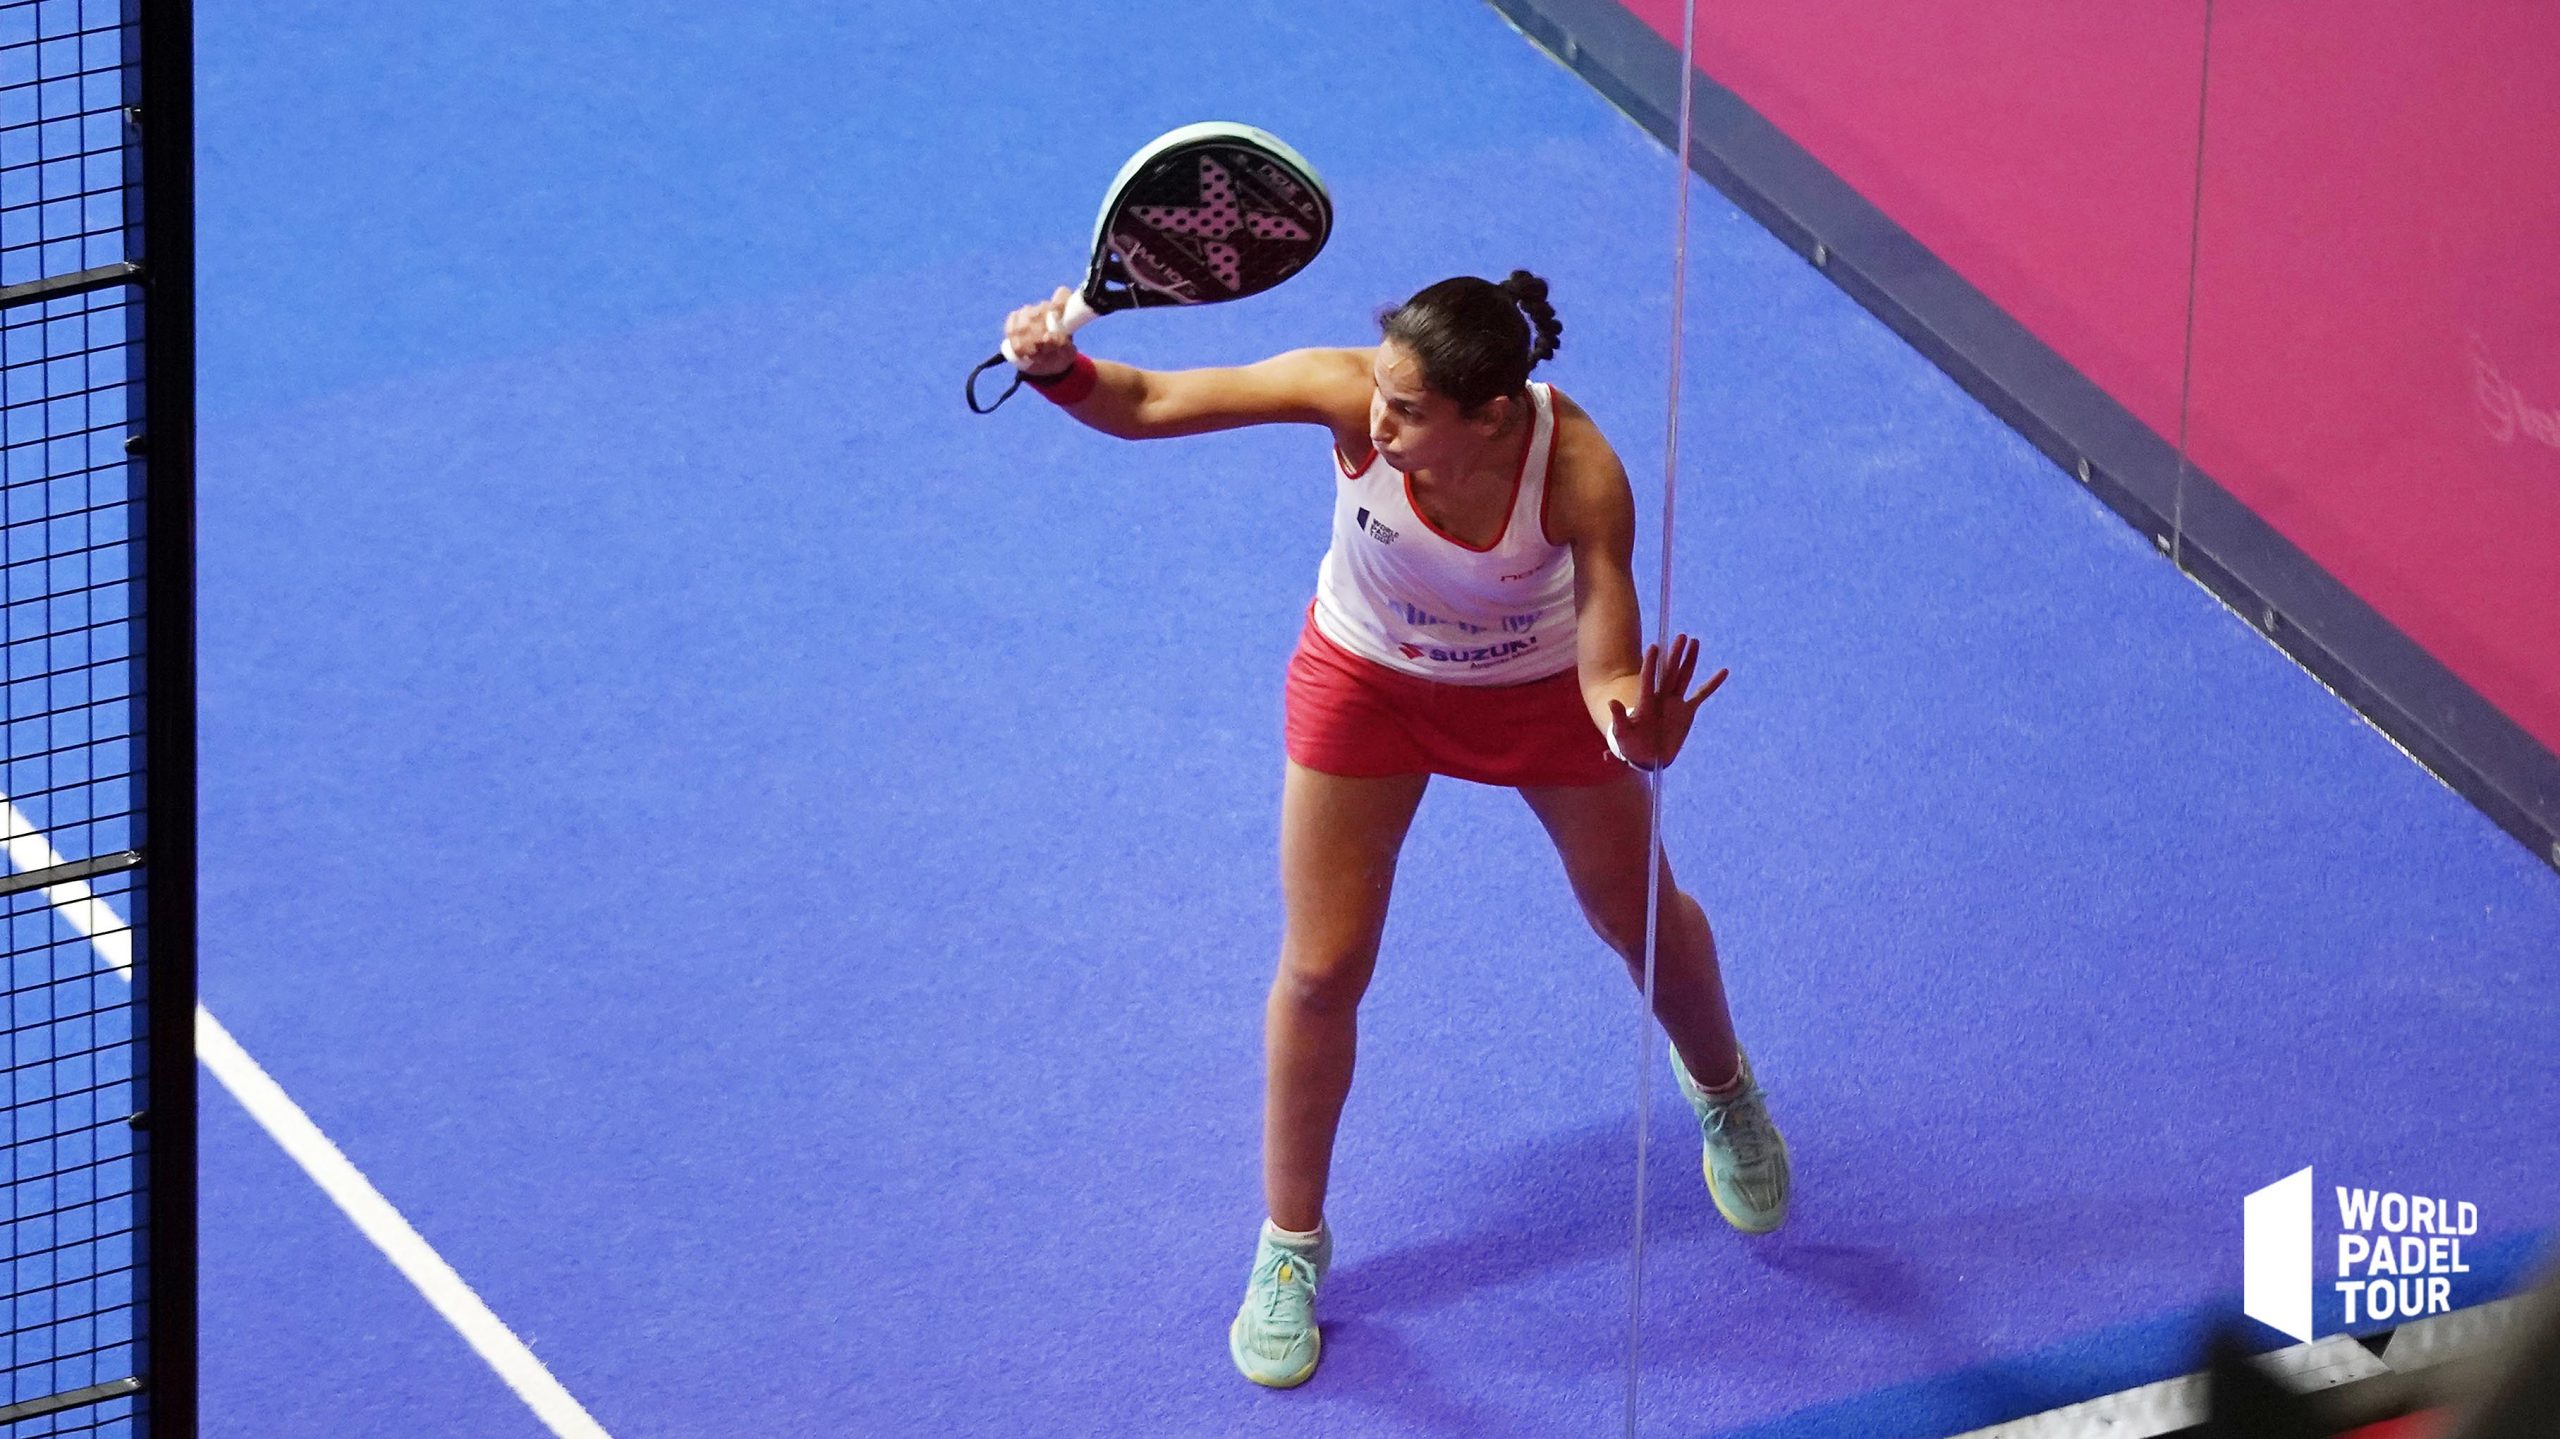 Majo Sánchez Alayeto withdraws from Circus Brussels Padel Open 2022 with injury